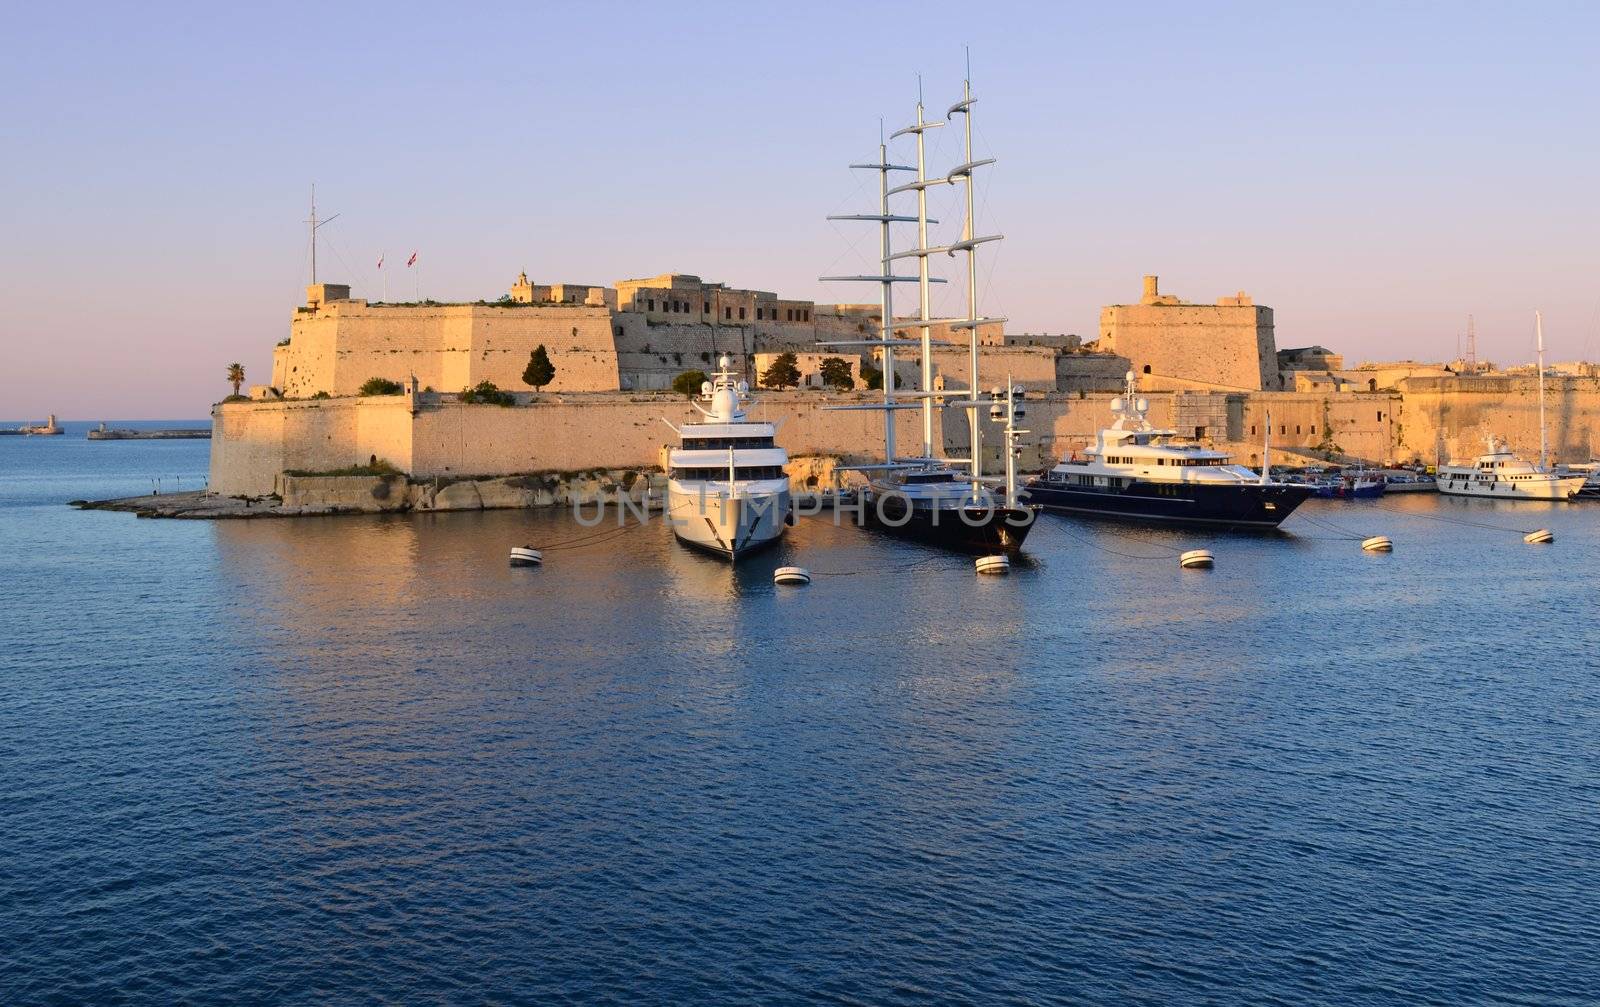 Sunset over the fort St. Angelo in the Grand Harbour of Malta